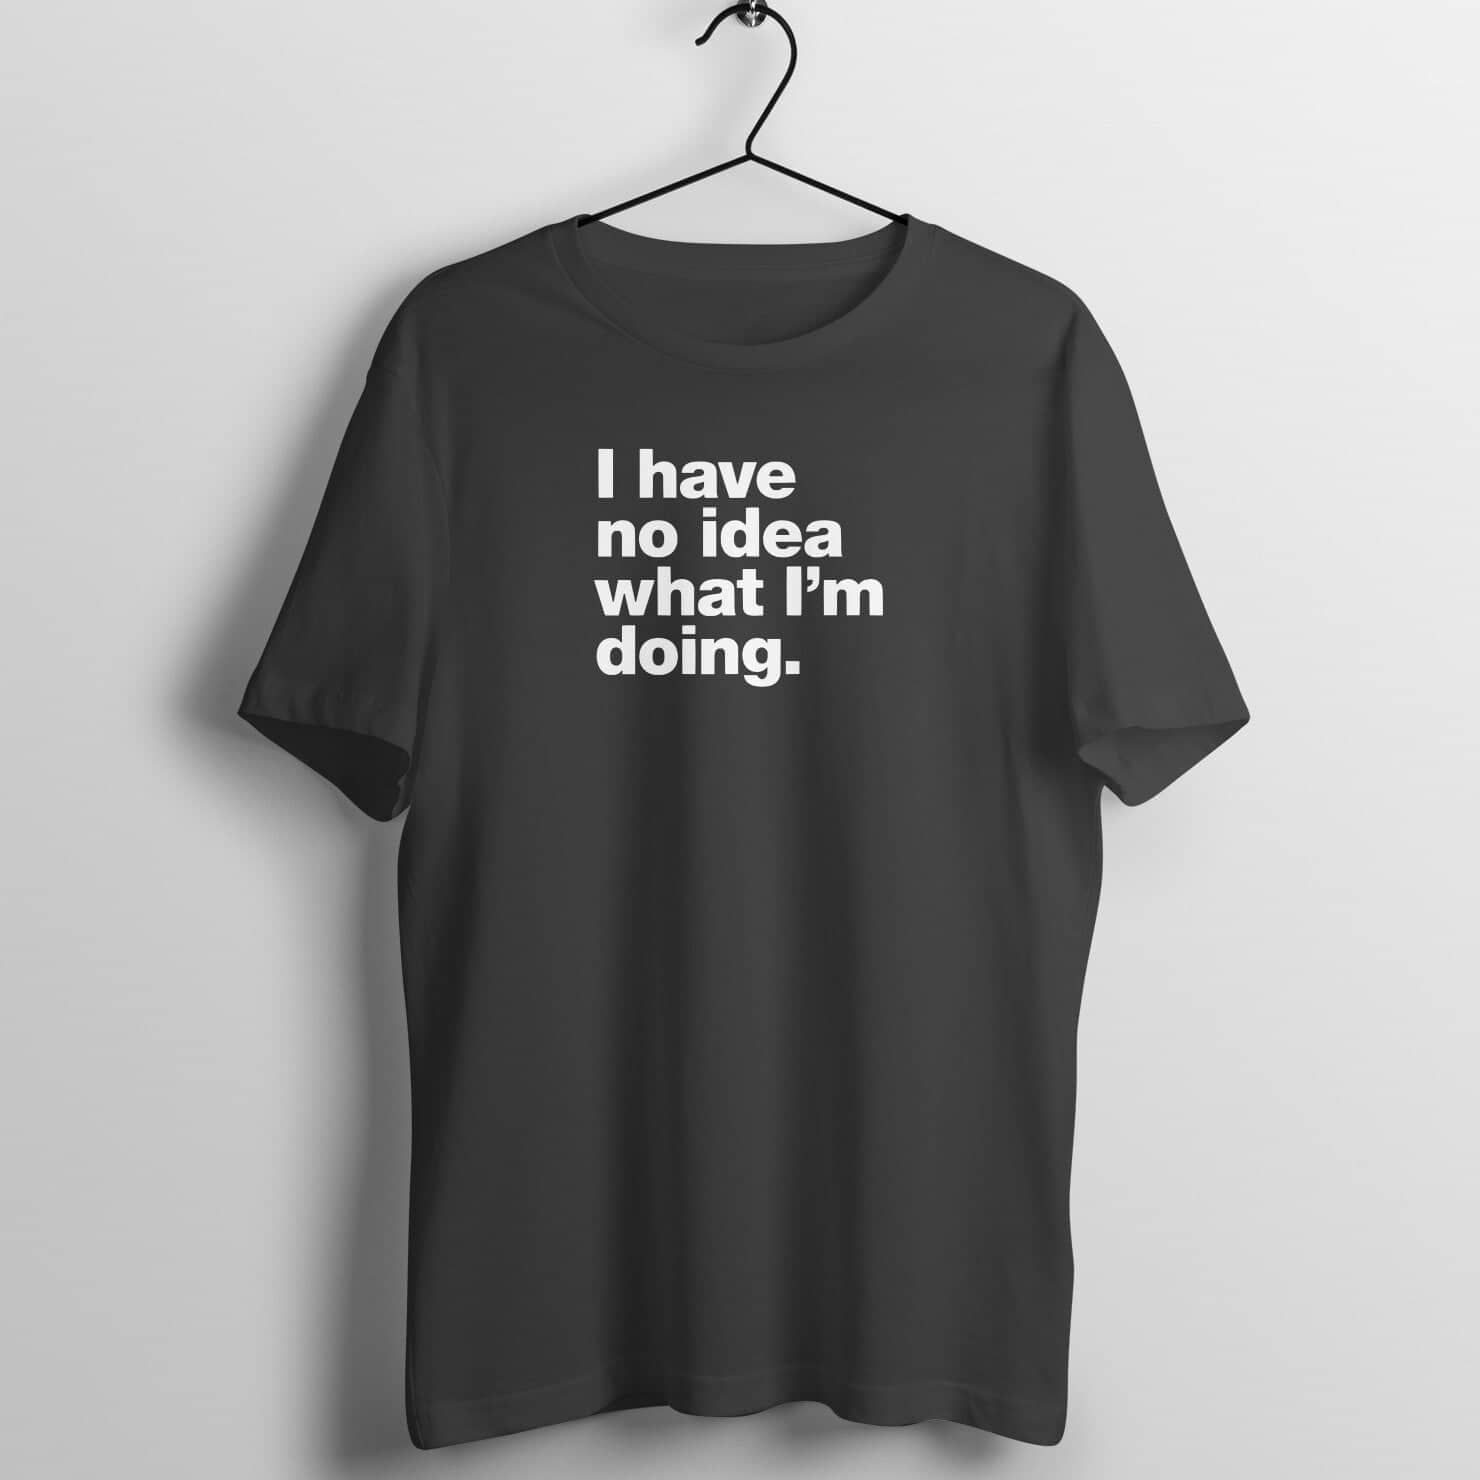 I Have No Idea What I'm Doing Exclusive Black T Shirt for Men and Women freeshipping - Catch My Drift India